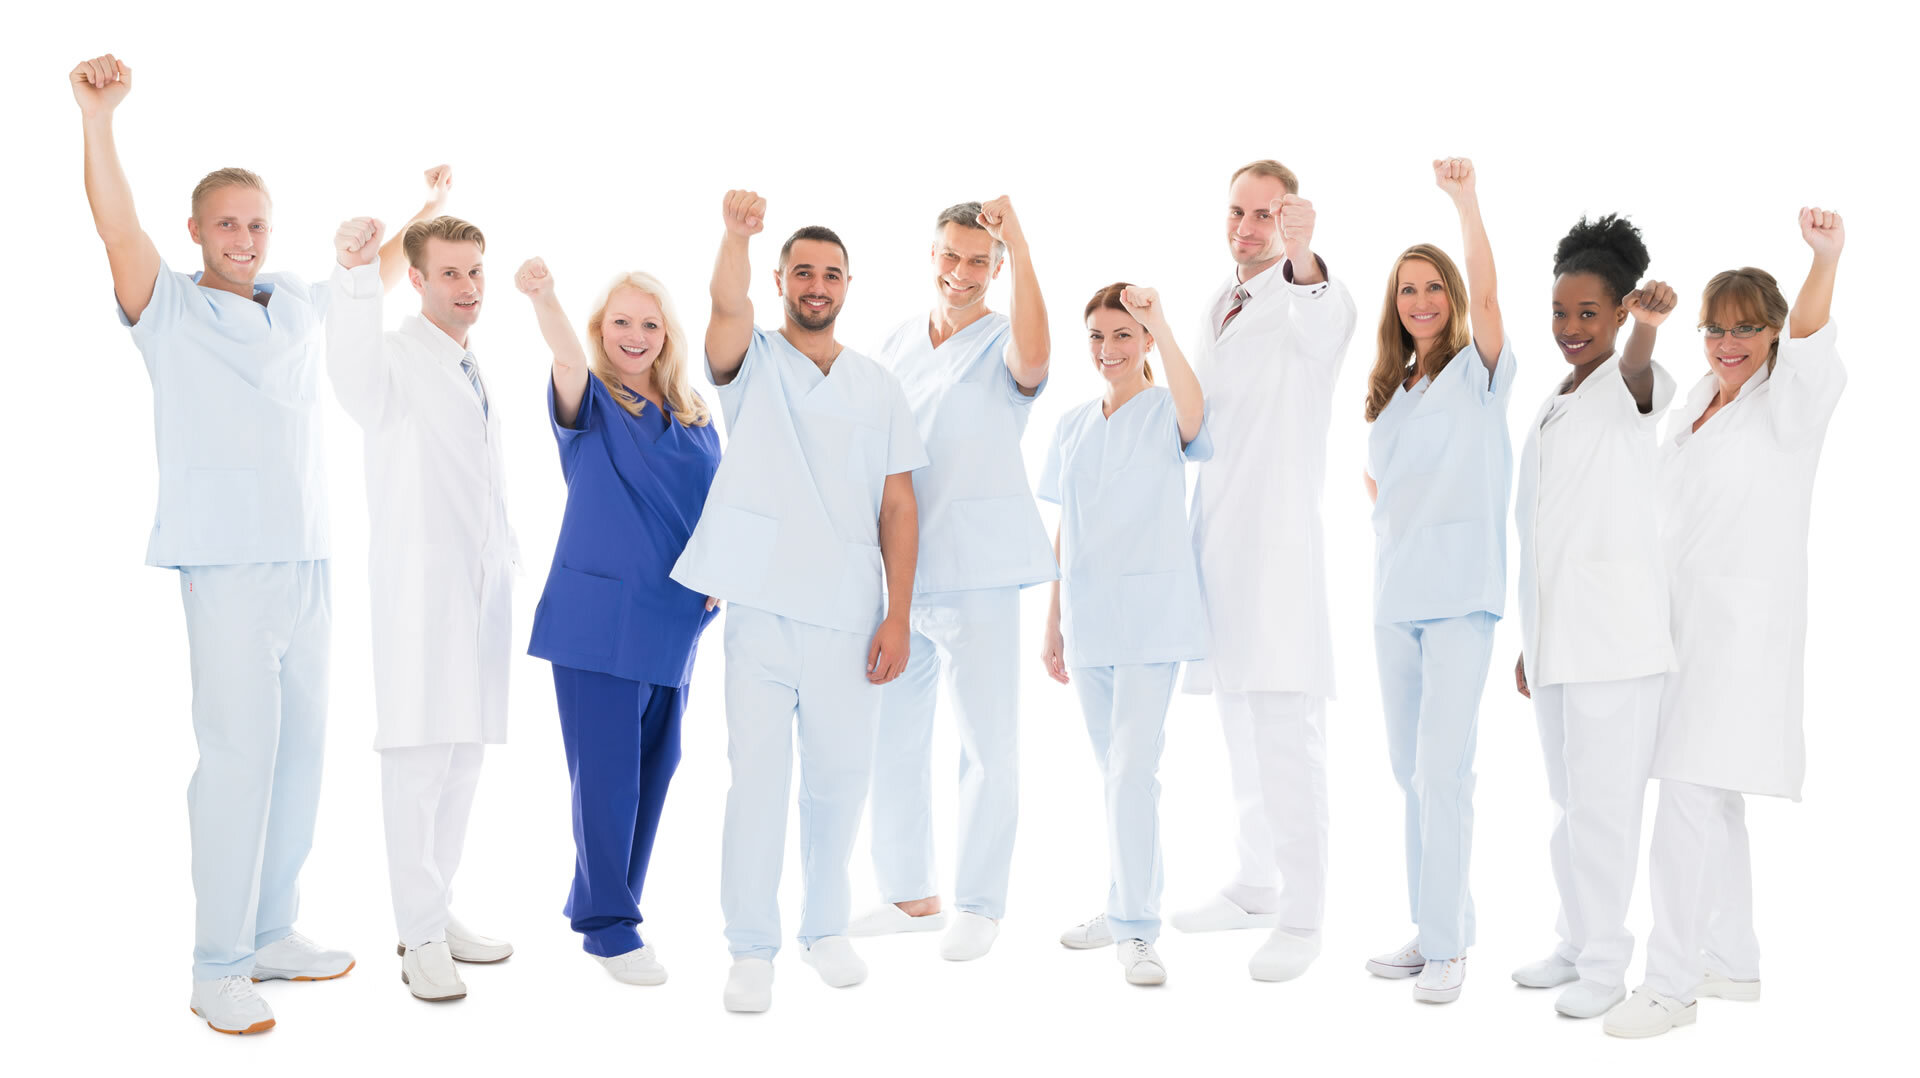 full-length-portrait-of-multiethnic-medical-team-standing-with-arms-raised-against-white